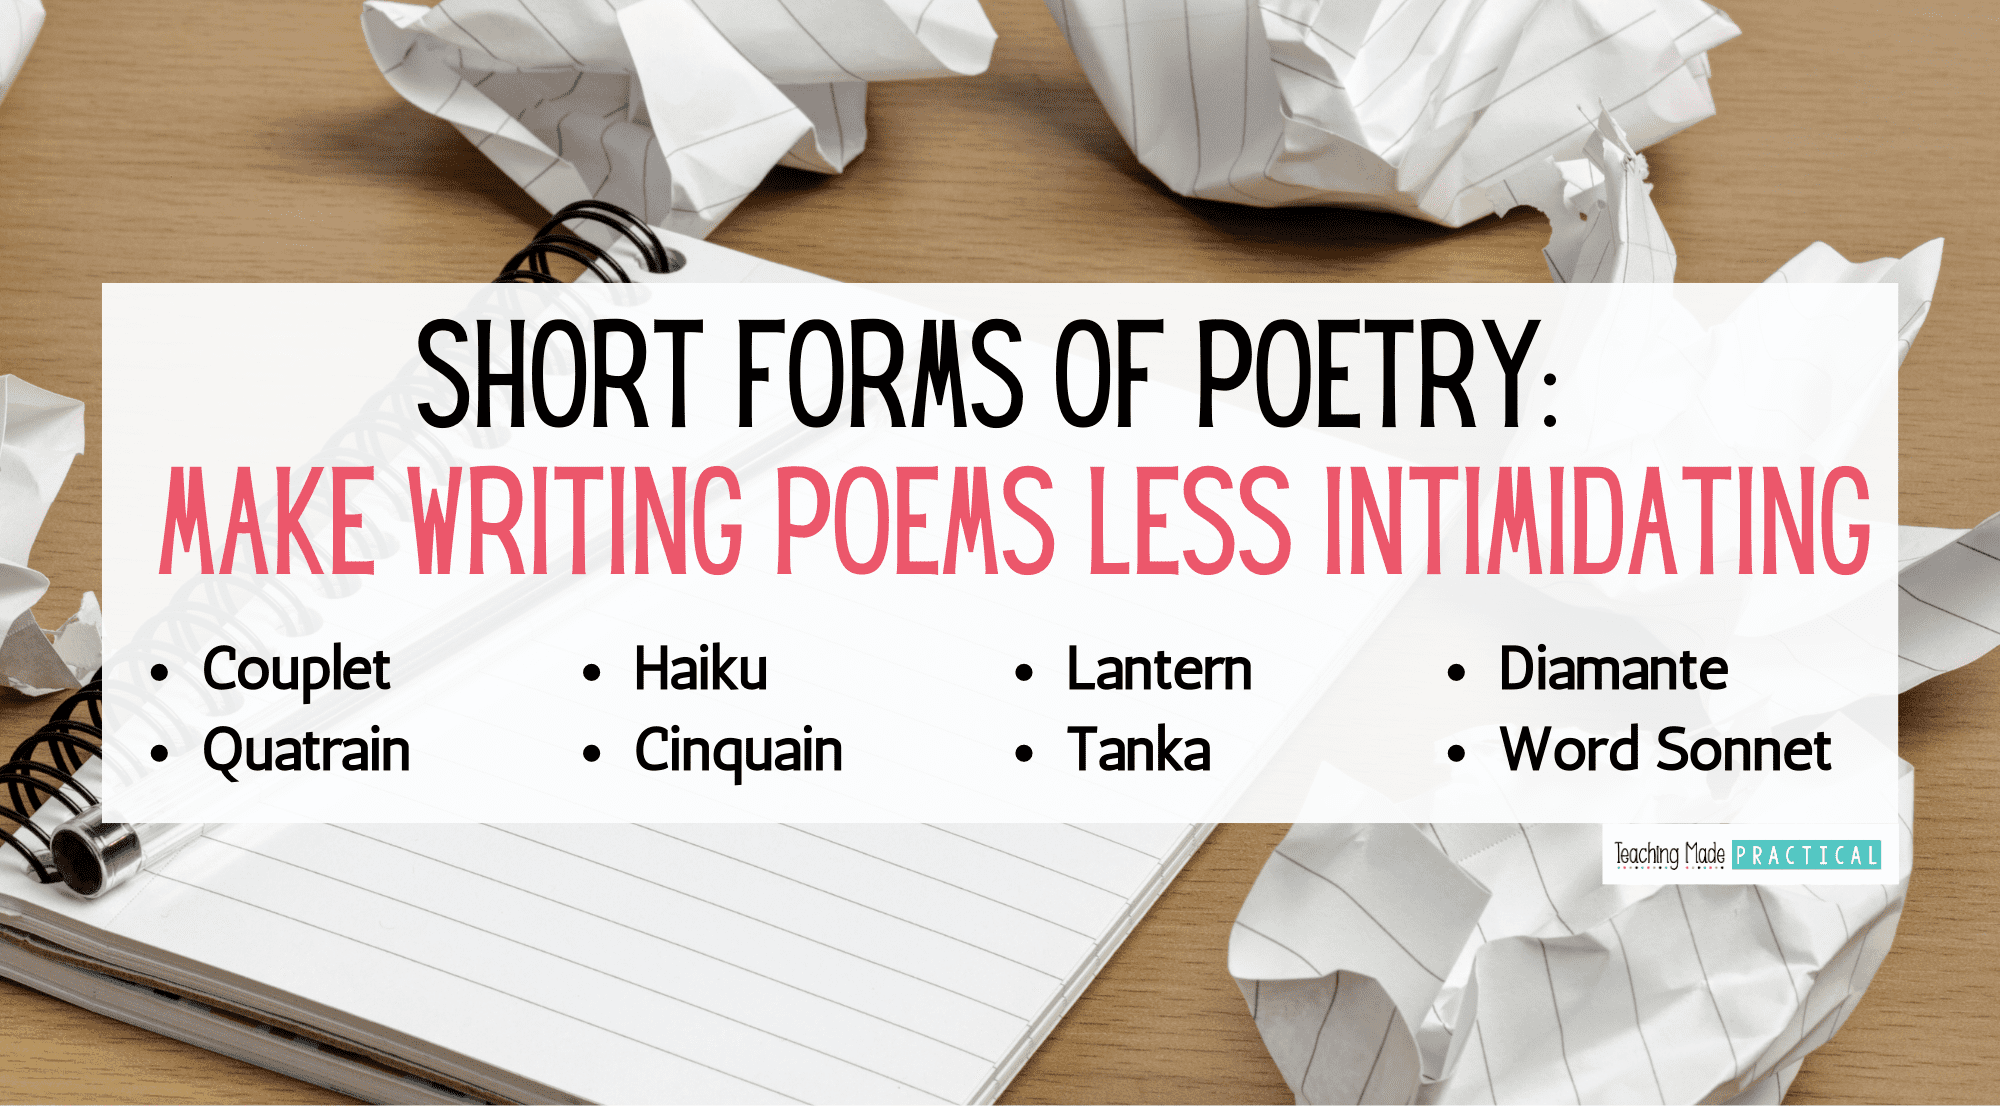 introduce poetry writing for 3rd, 4th, and 5th grade students with these short forms of poetry